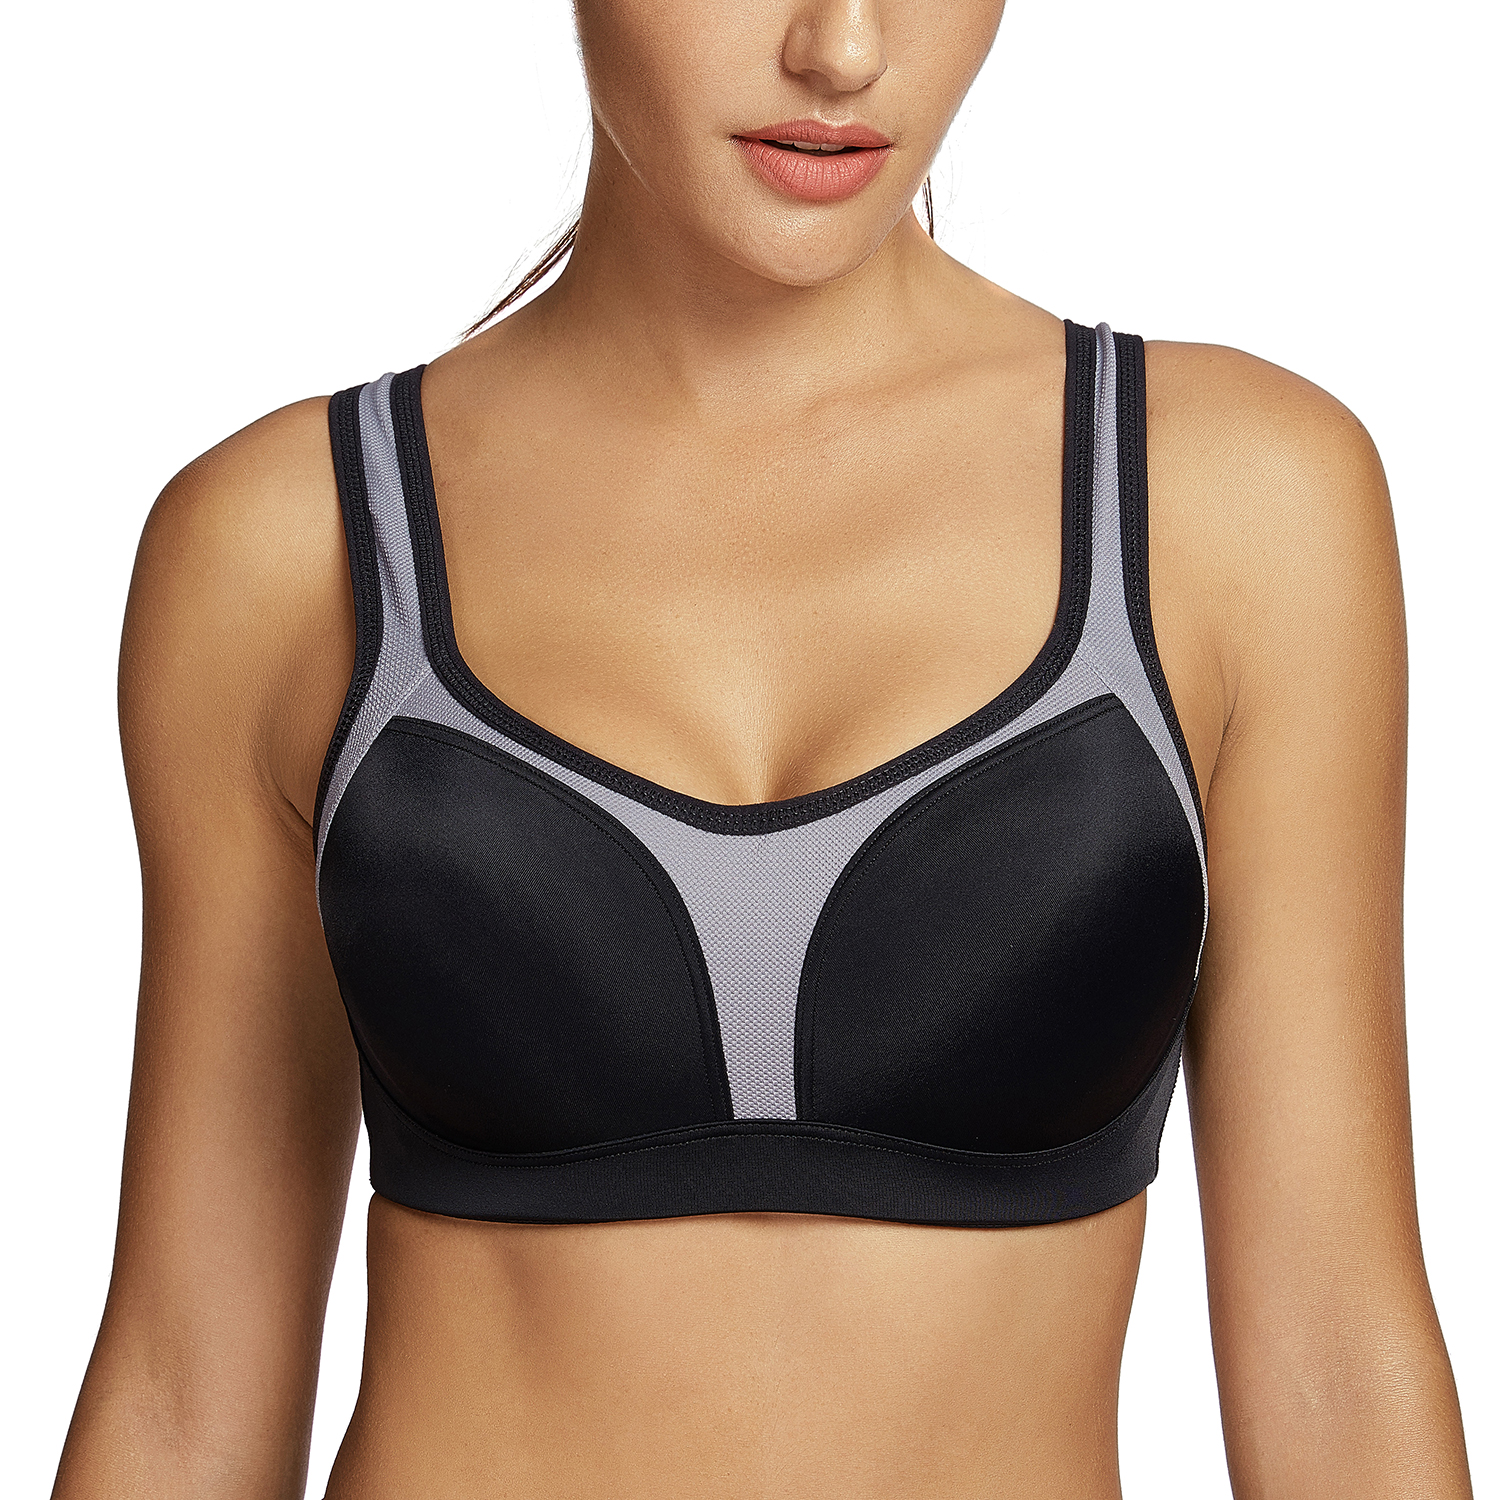 SYROKAN Women's Full Support High Impact Racerback Lightly Lined Underwire Sports Bra 